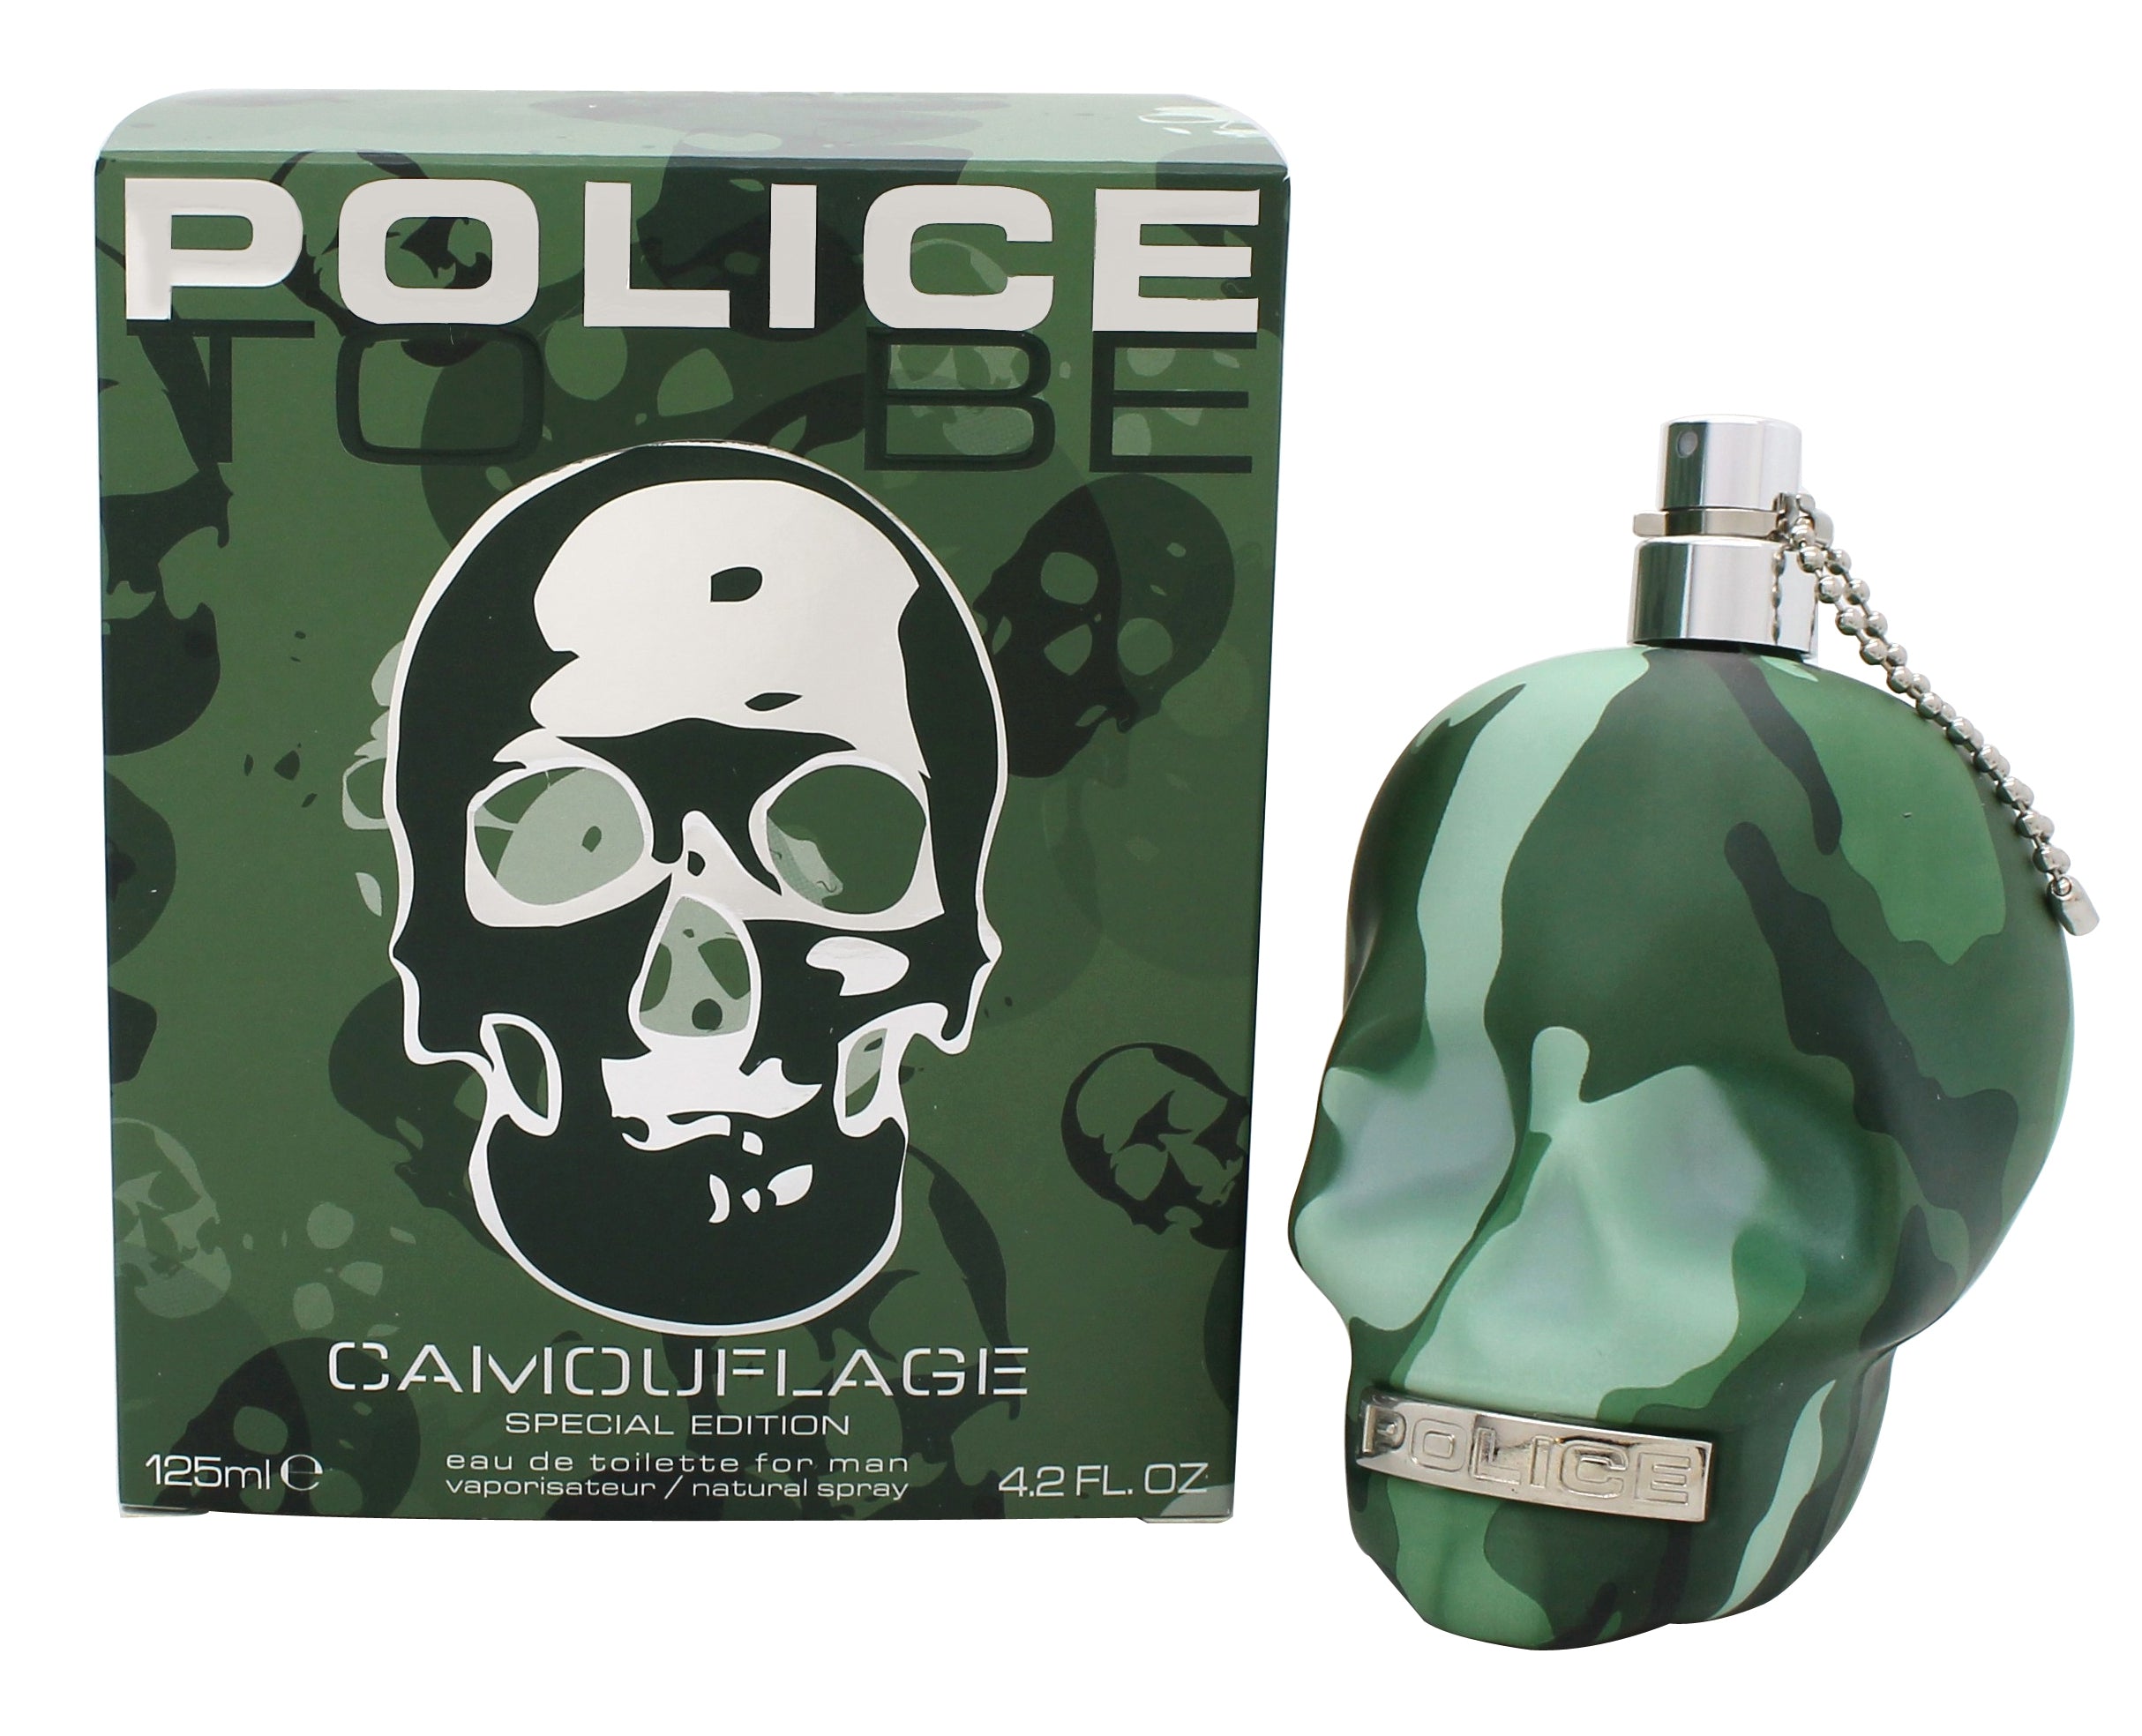 View Police To Be Camouflage Eau de Toilette 125ml Spray information